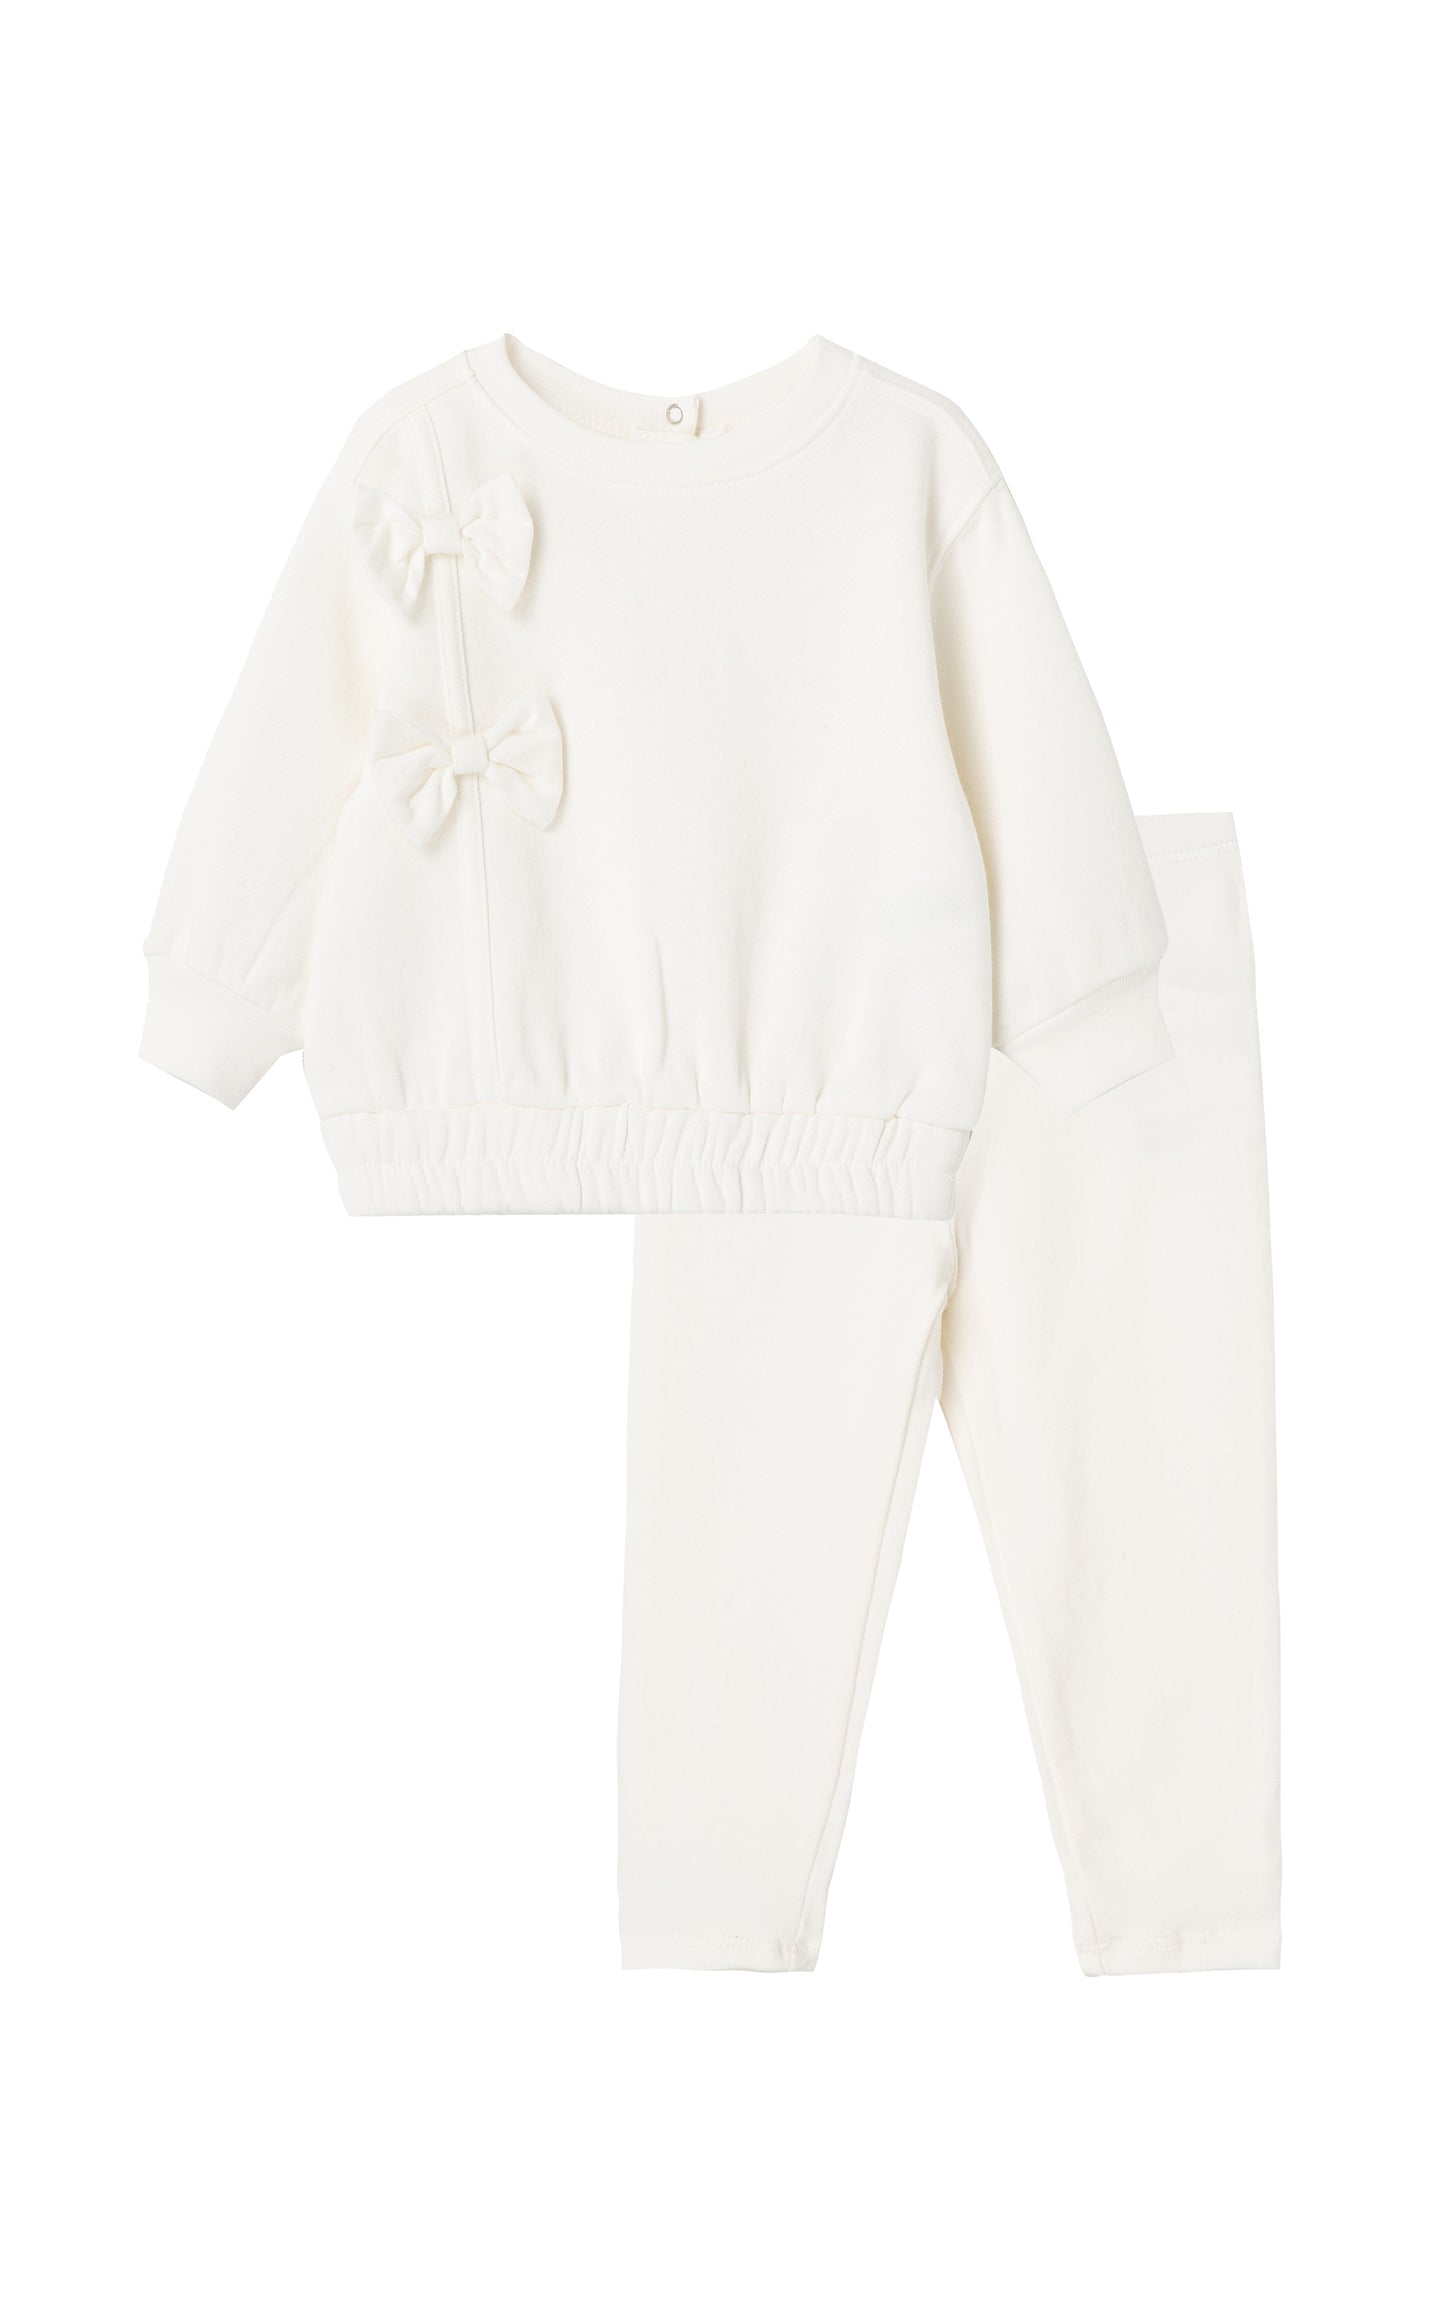 Front view of off-white fleece sweatshirt set with a bow 